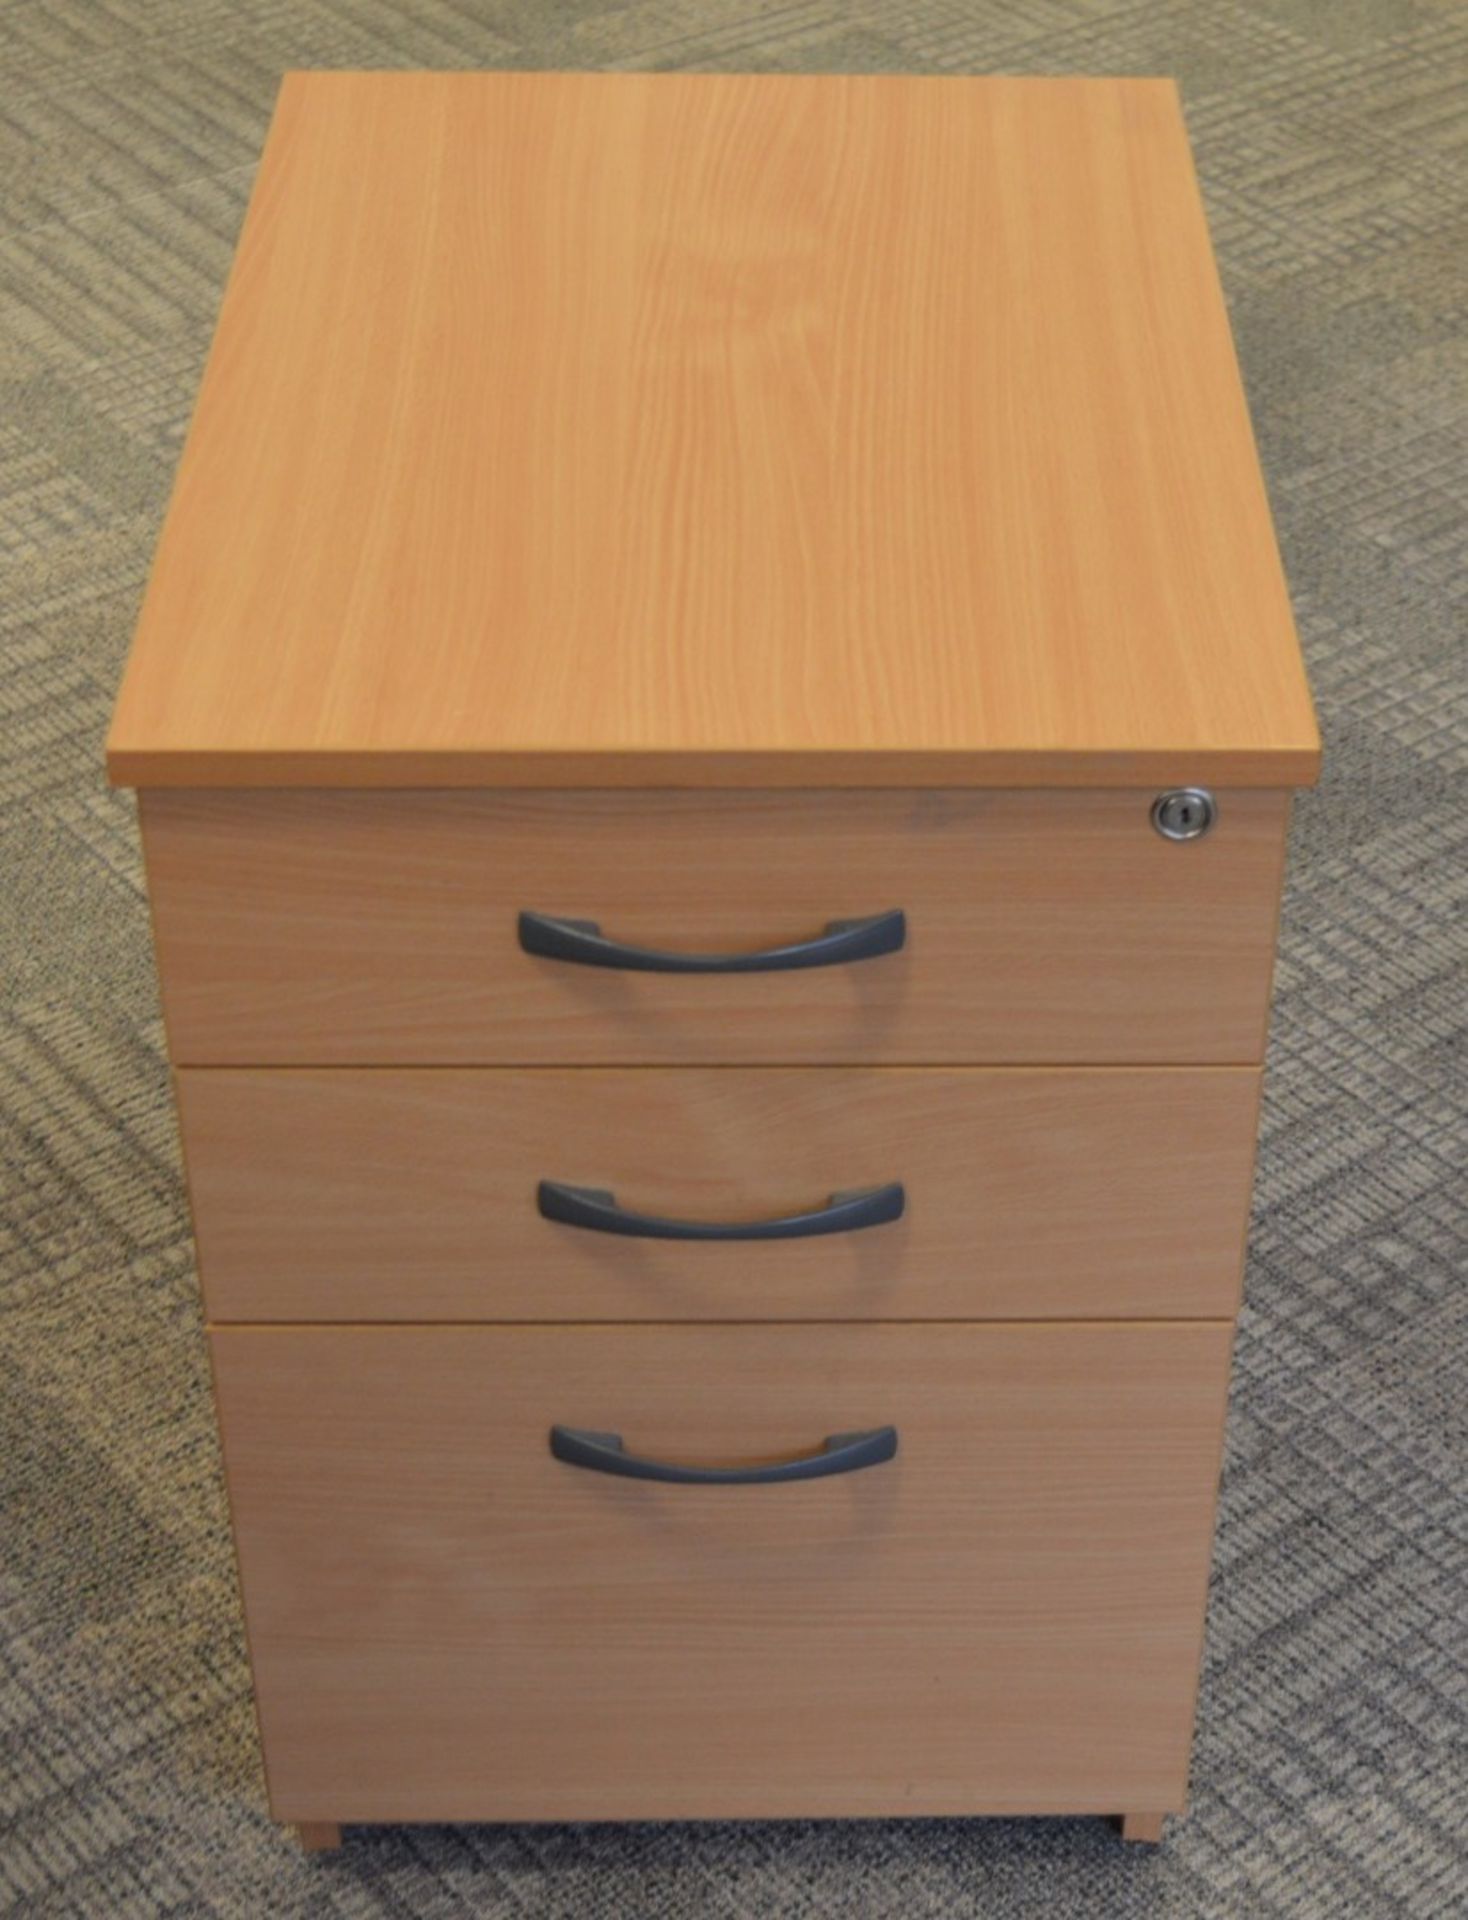 1 x Three Drawer Mobile Pedestal Drawers - With Key - Modern Beech Finish - Two Storage Drawers - Image 2 of 6